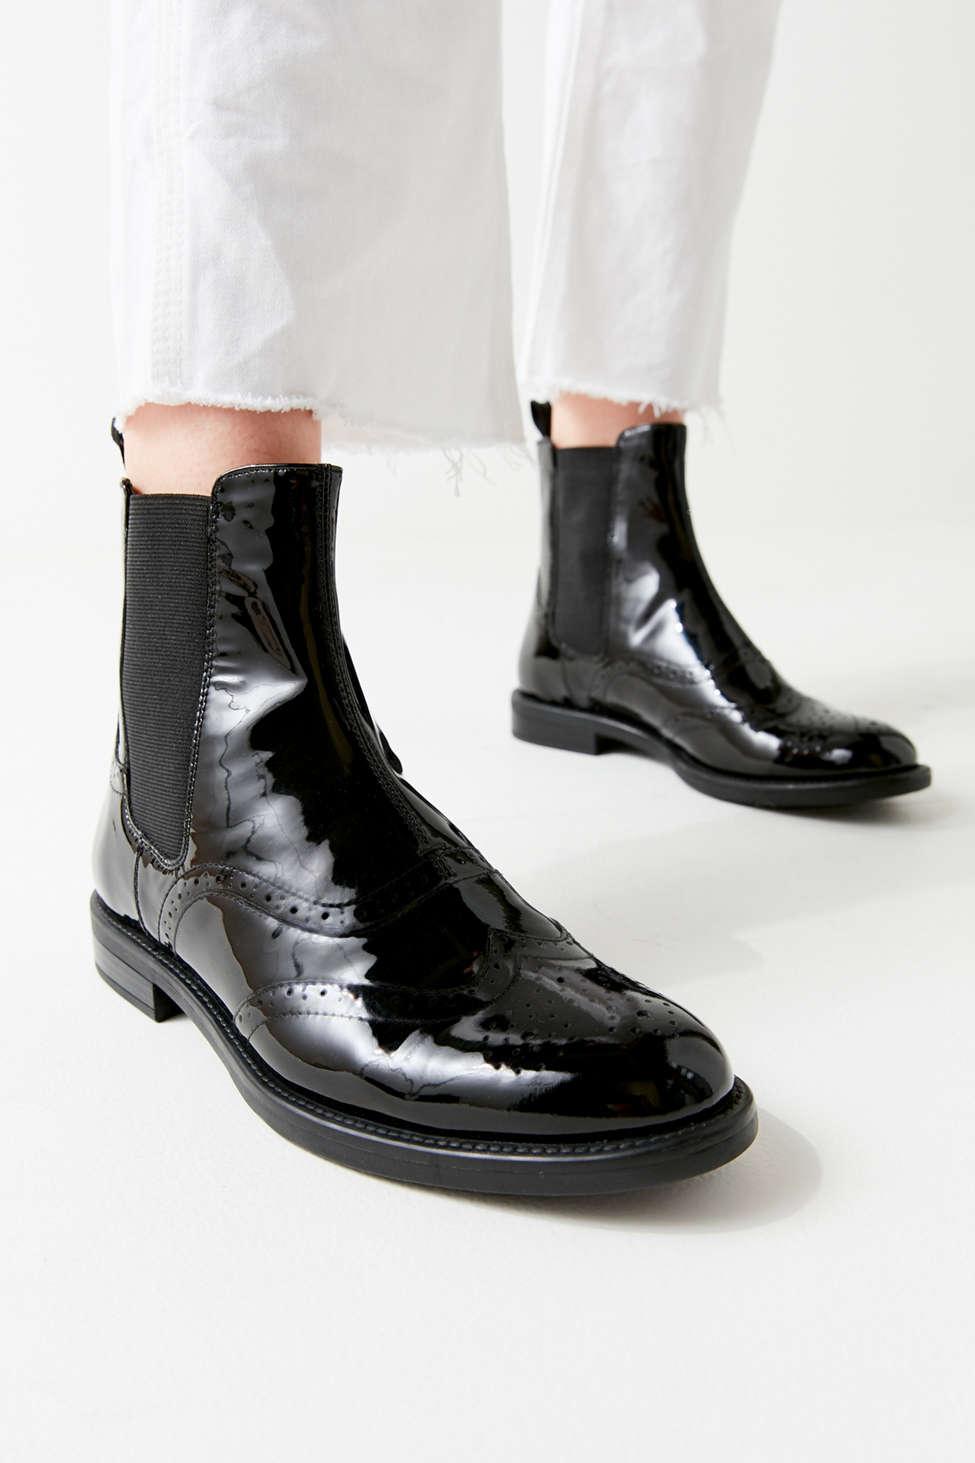 Vagabond Amina Patent Leather Chelsea Boot in Black - Lyst